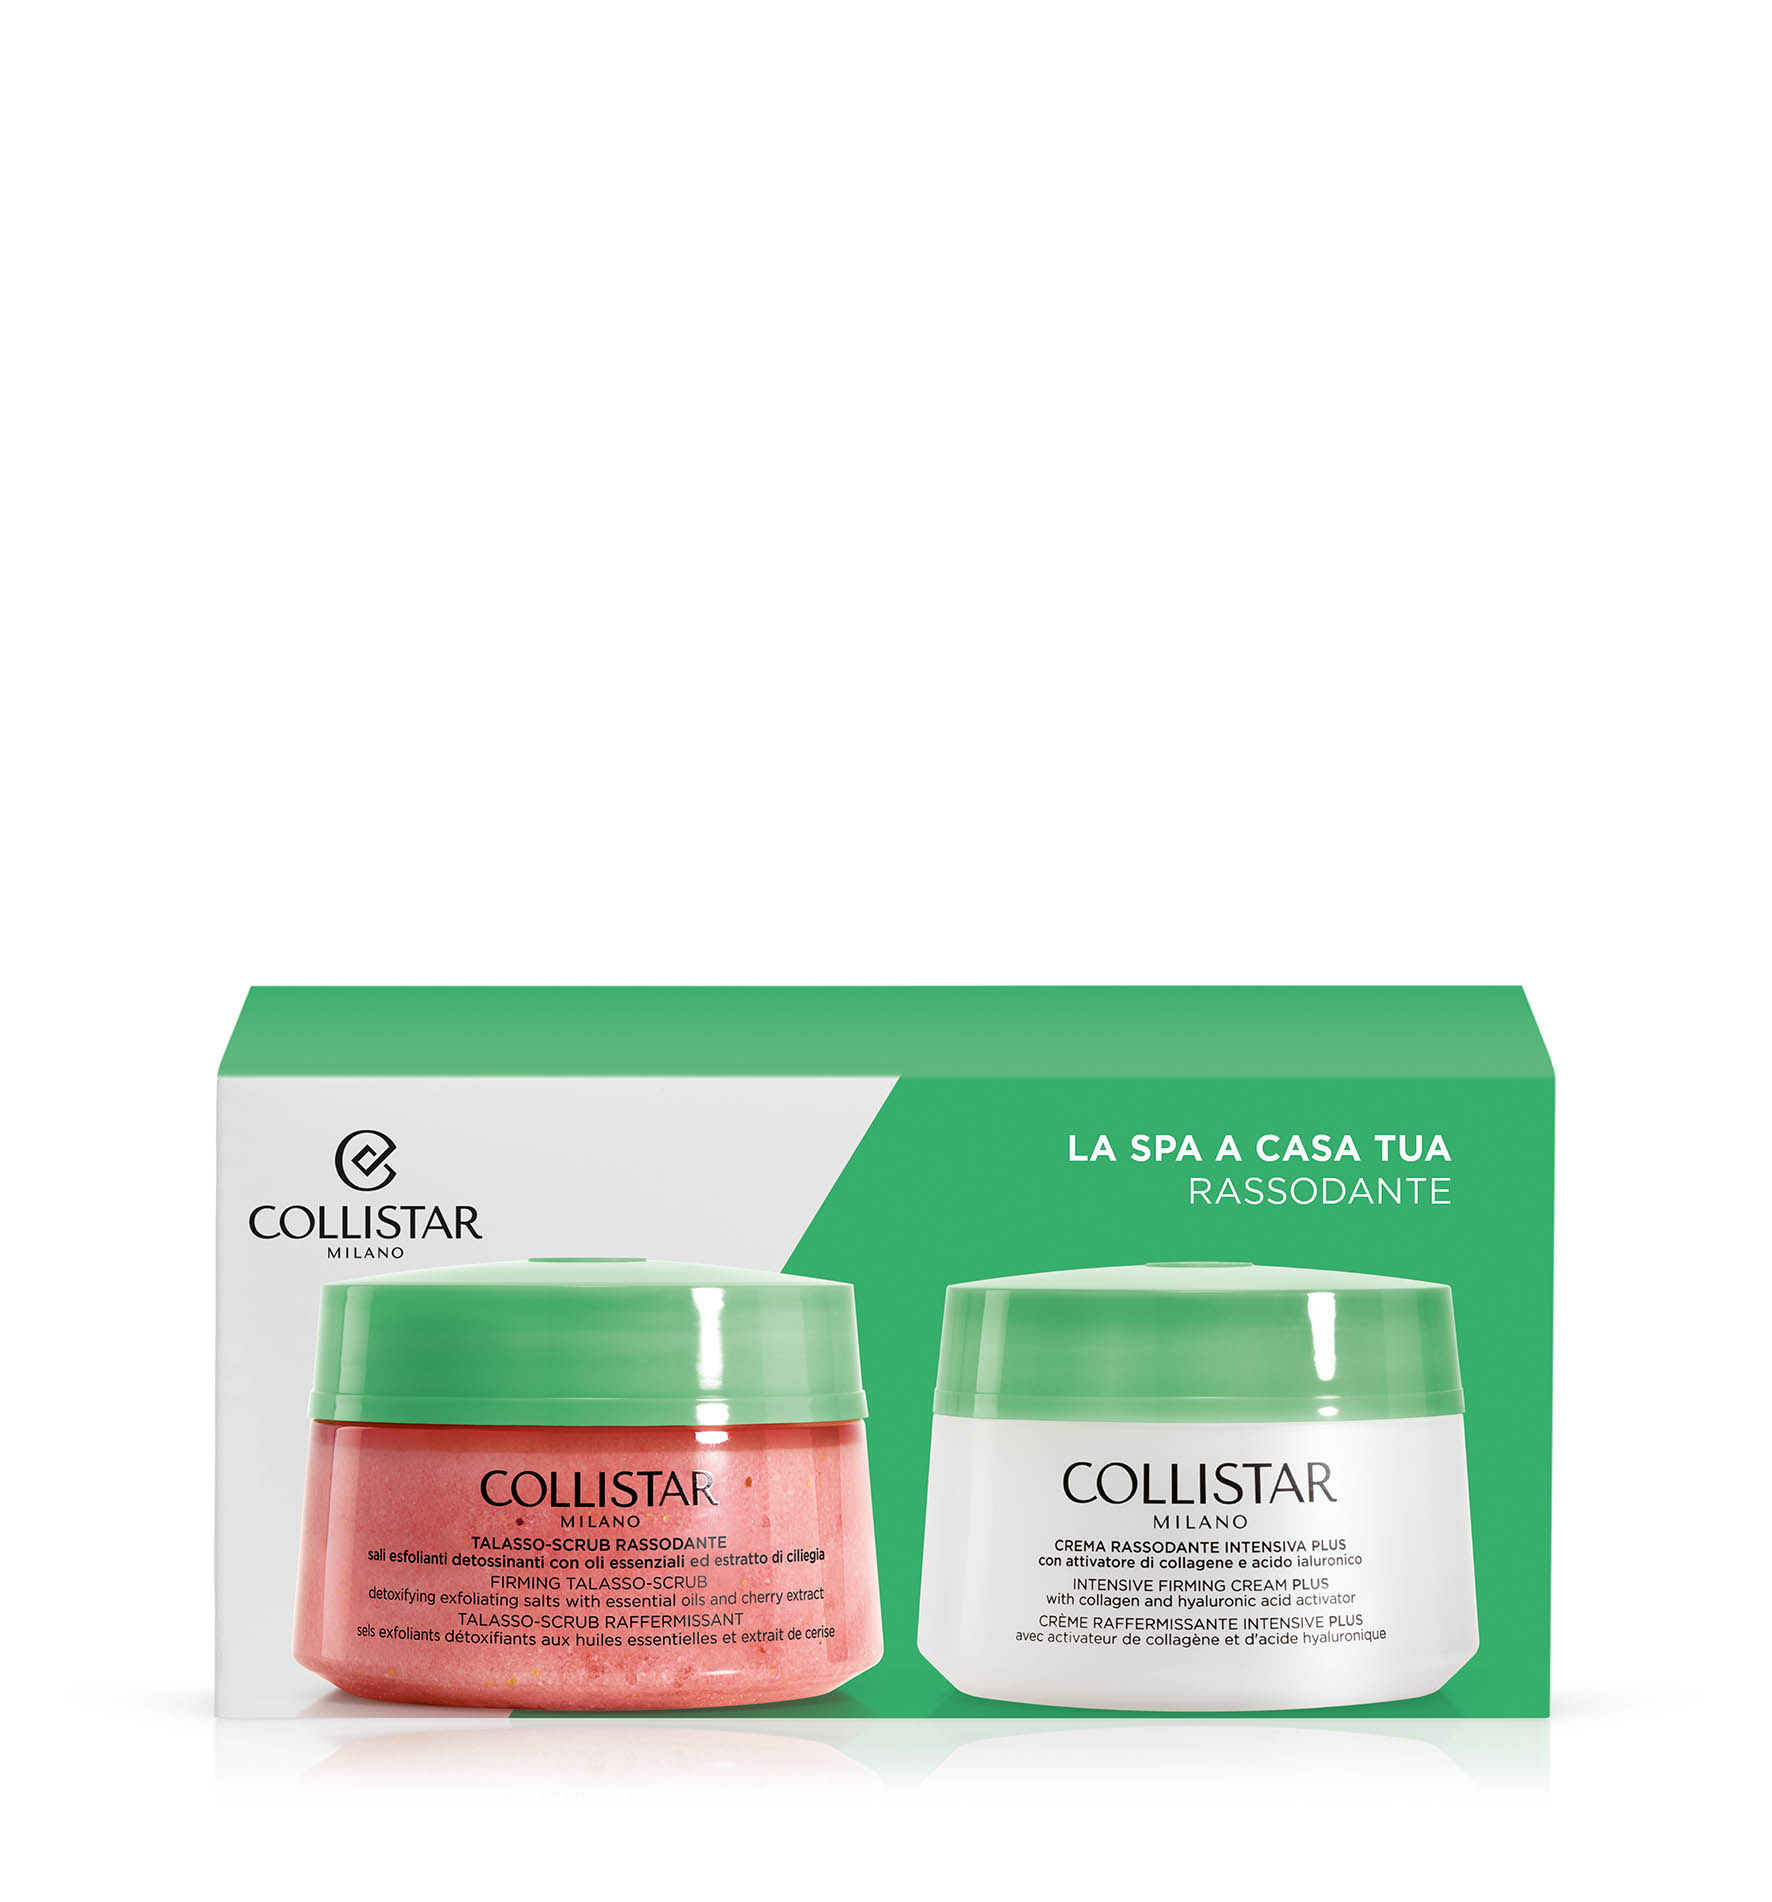 SET SPA AT HOME
- FIRMING BODY ROUTINE - NEW | Collistar - Shop Online Ufficiale